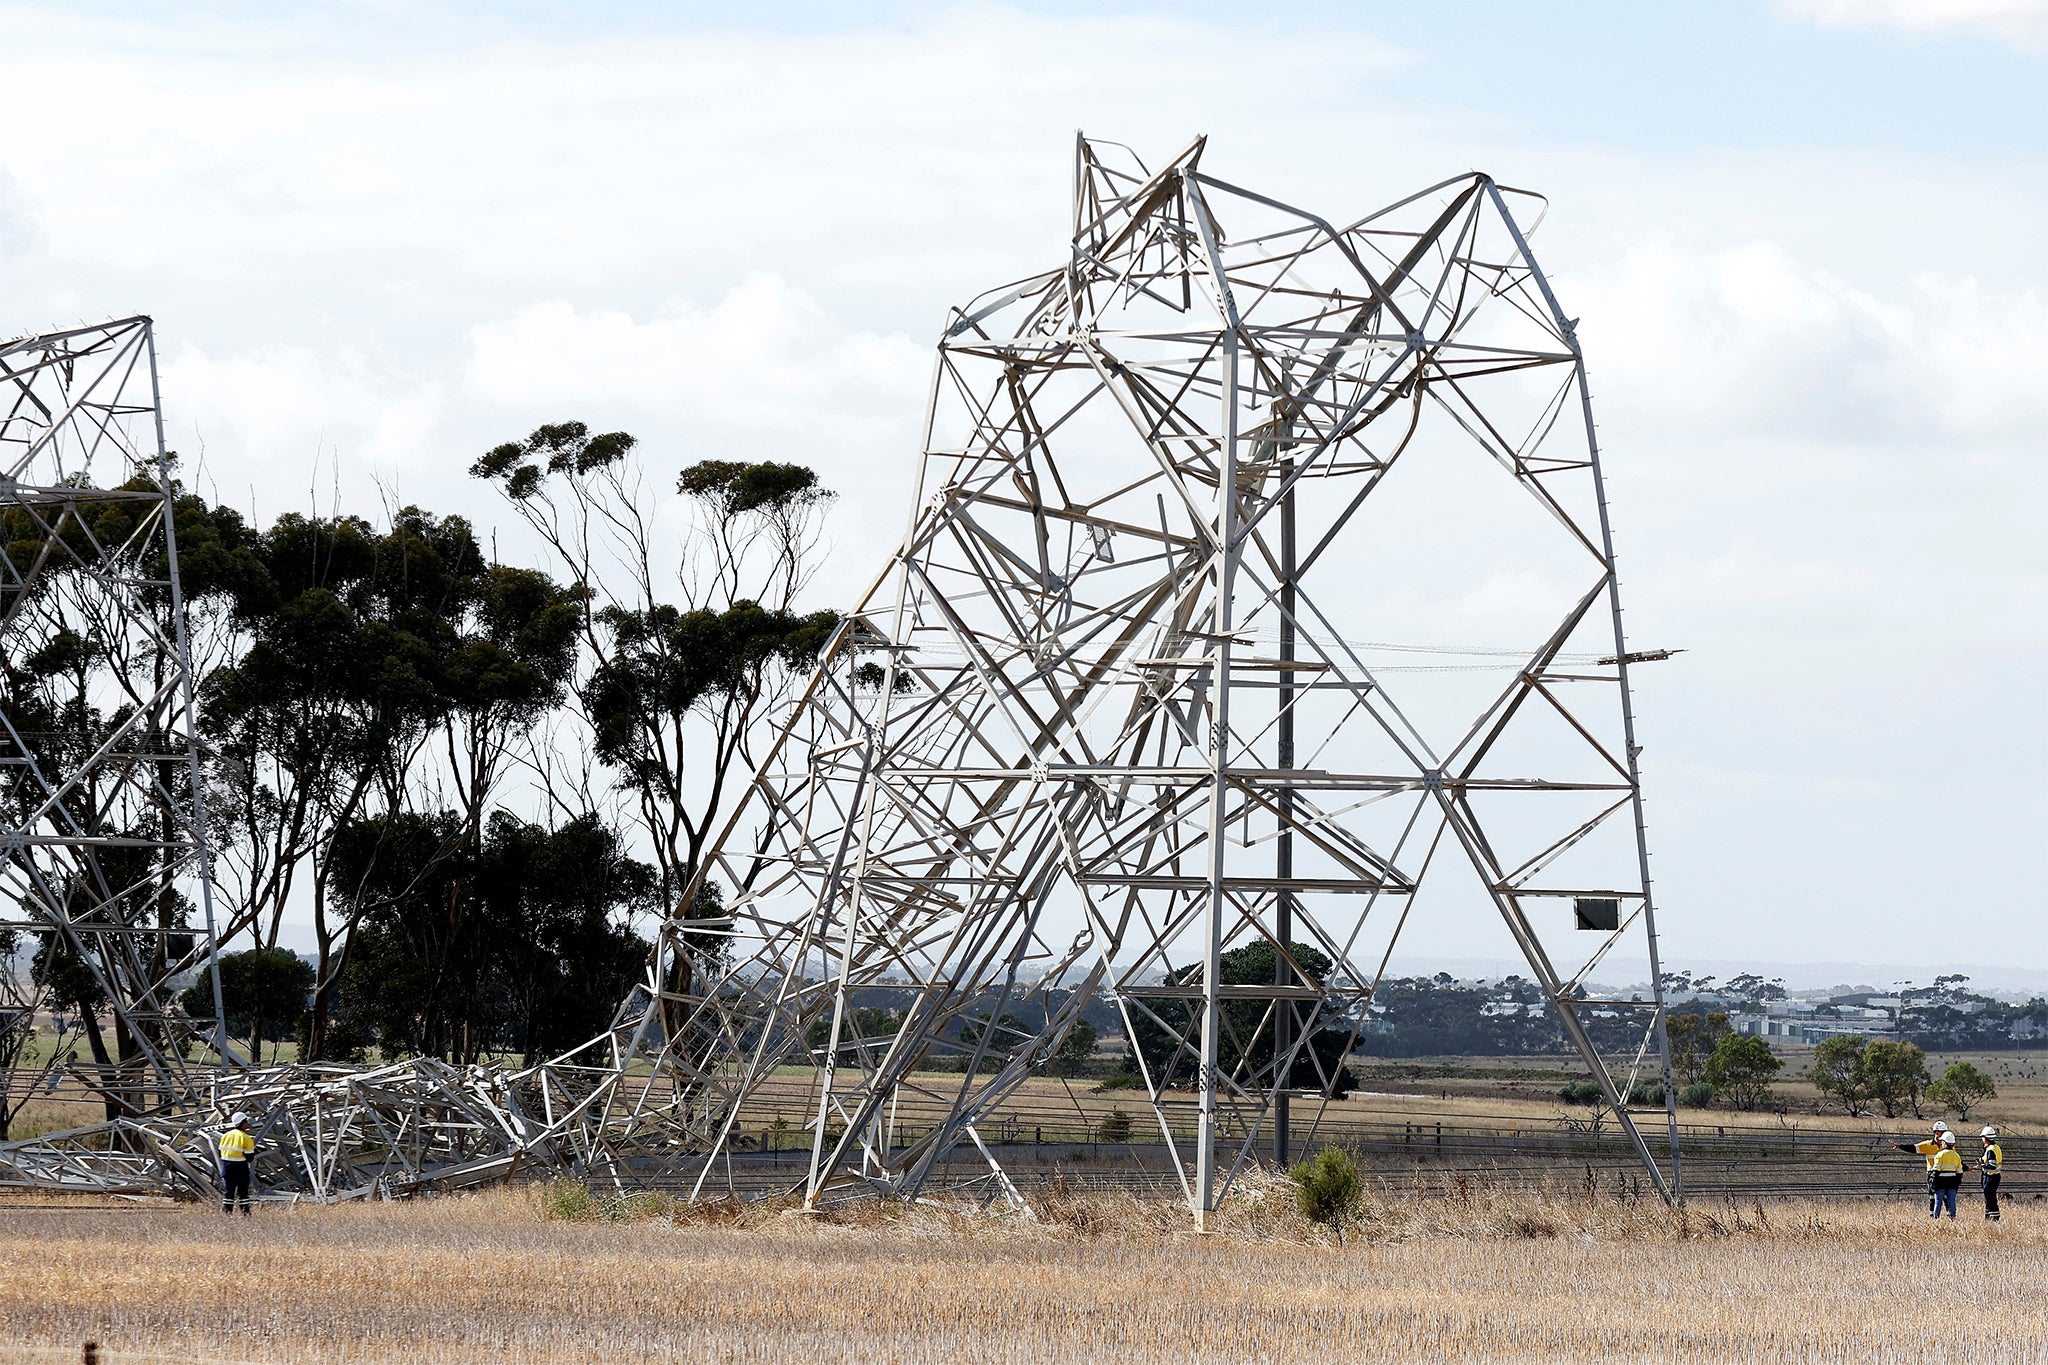 Workers inspect damaged transmission towers at Anakie in Victoria, Australia